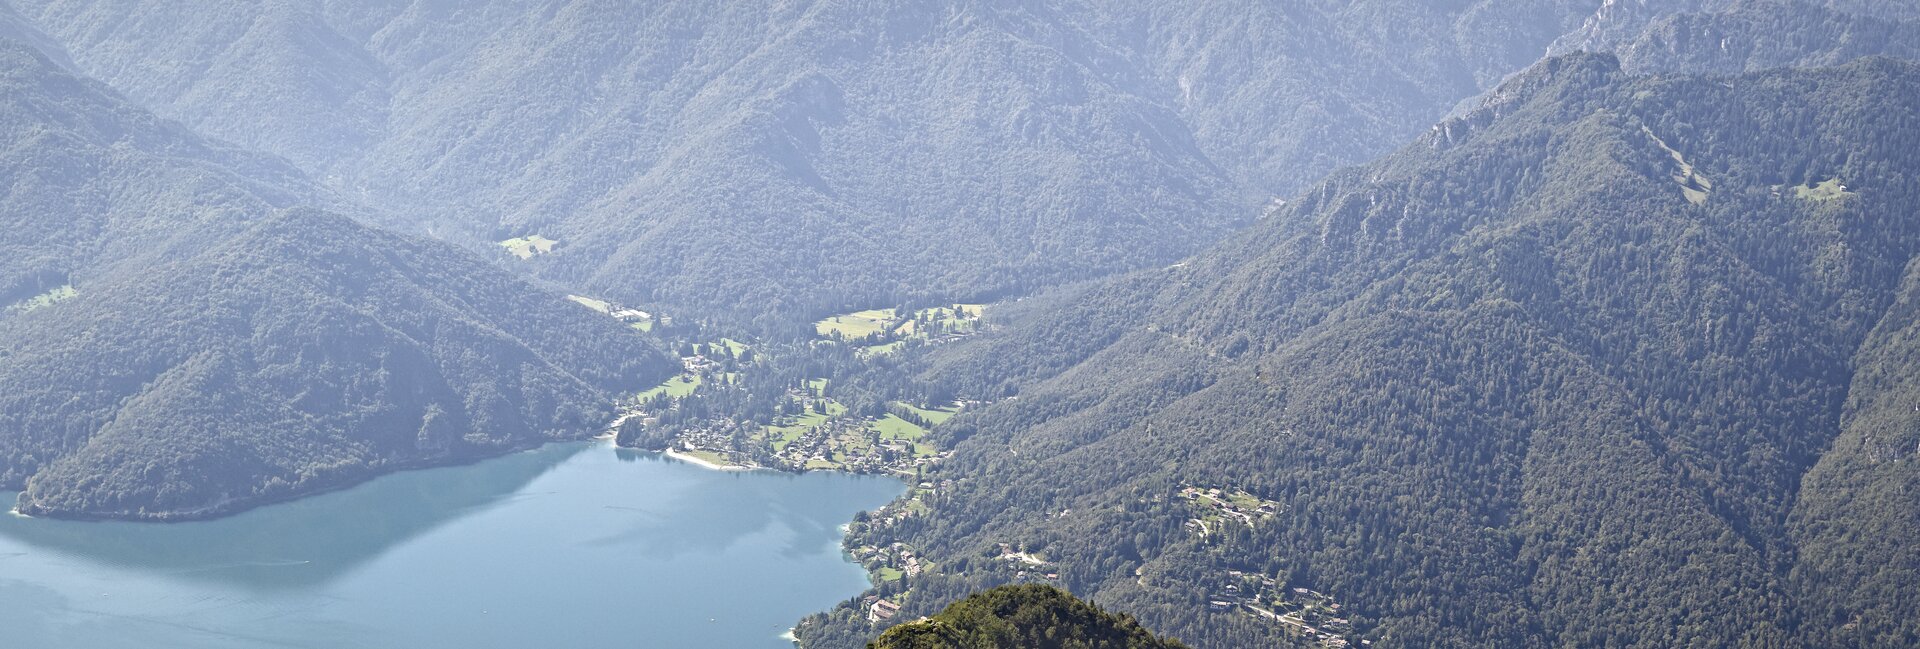 Valle di Ledro - The ideal venue for active holidays on the lake